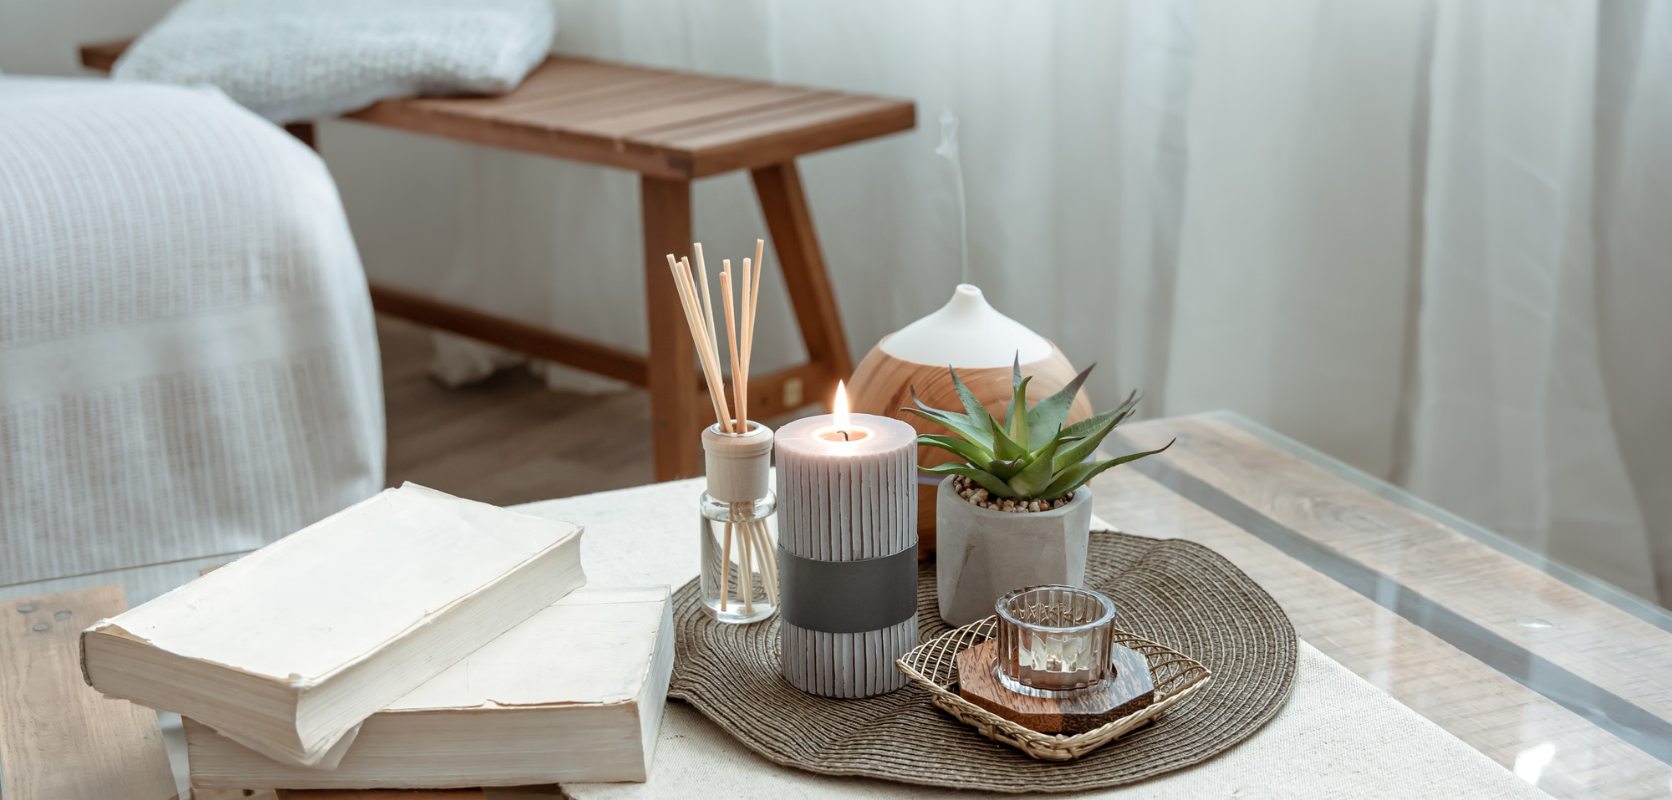 If you want to avoid air fresheners, you can opt for candles or incense. Best of all, this method is typically very budget-friendly and easy to do.